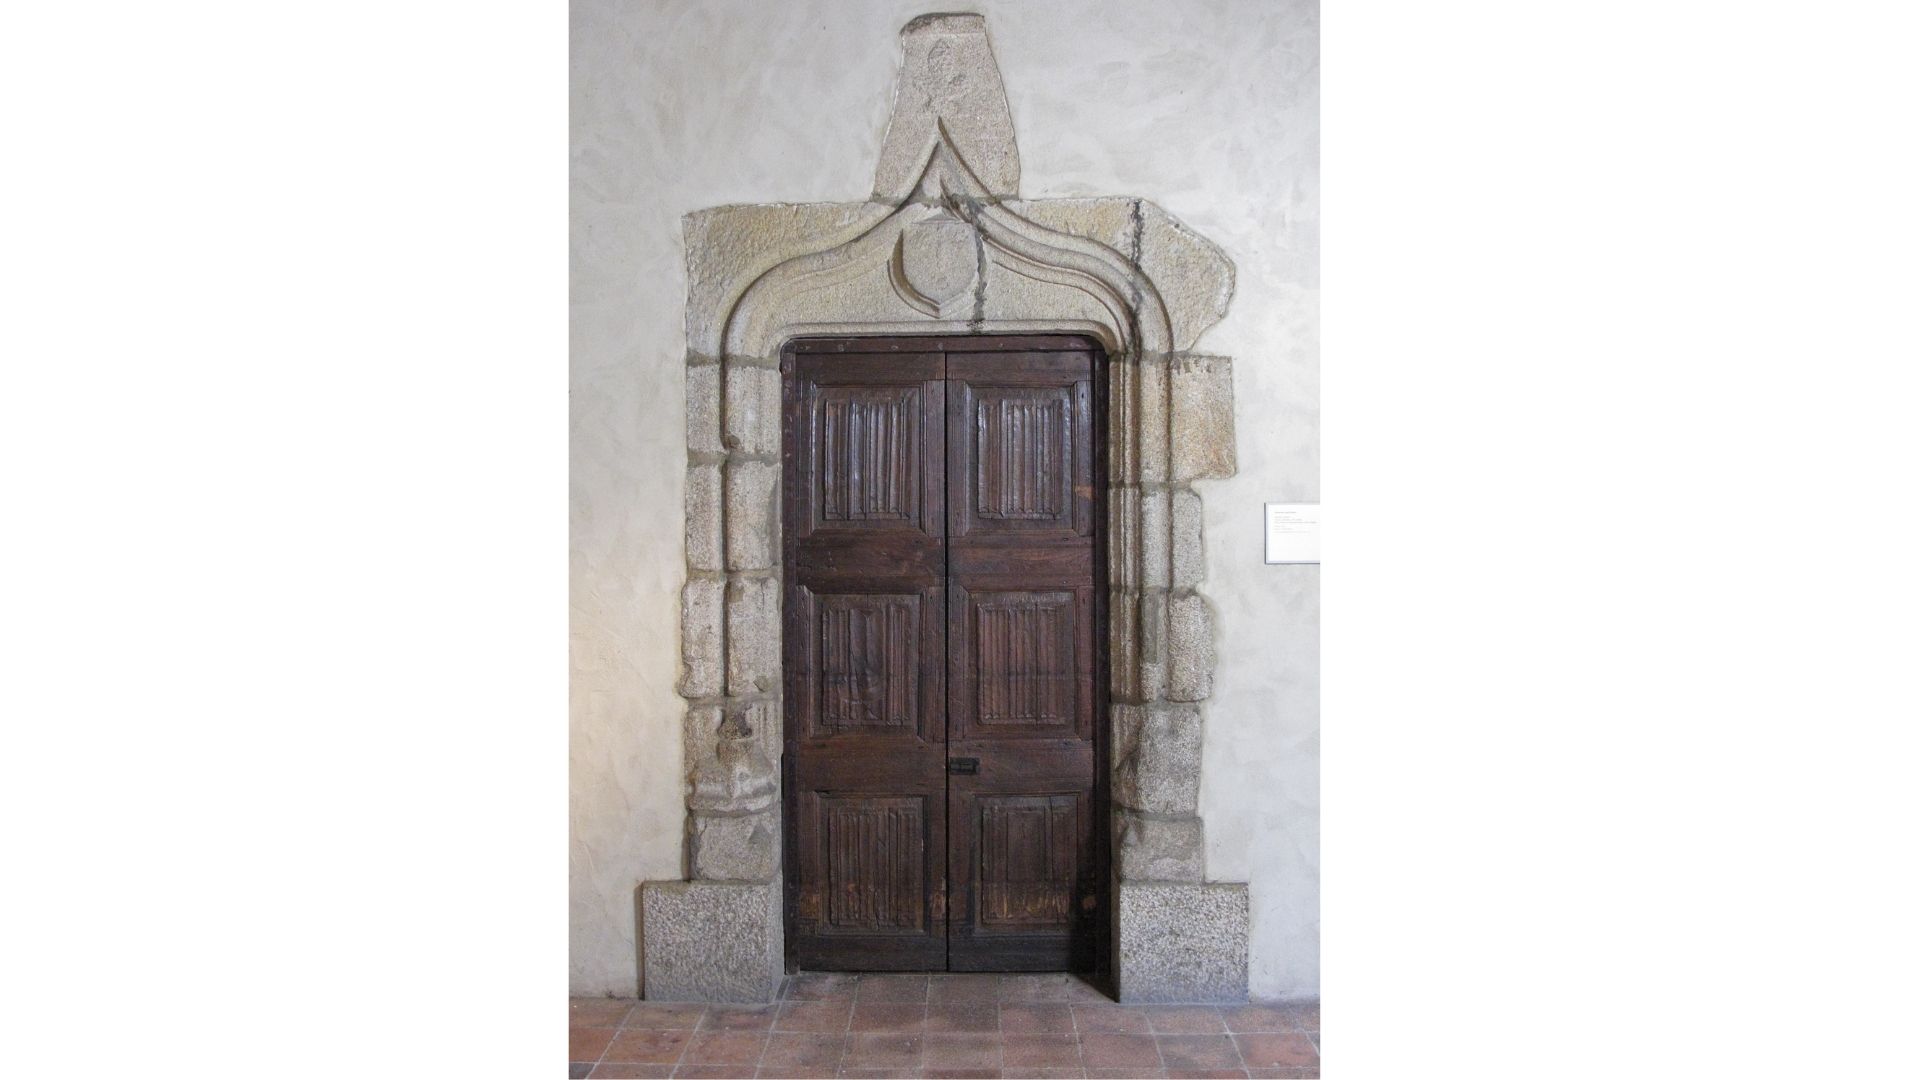 The 15th century French door in question.  (Image: The Metropolitan Museum of Art)